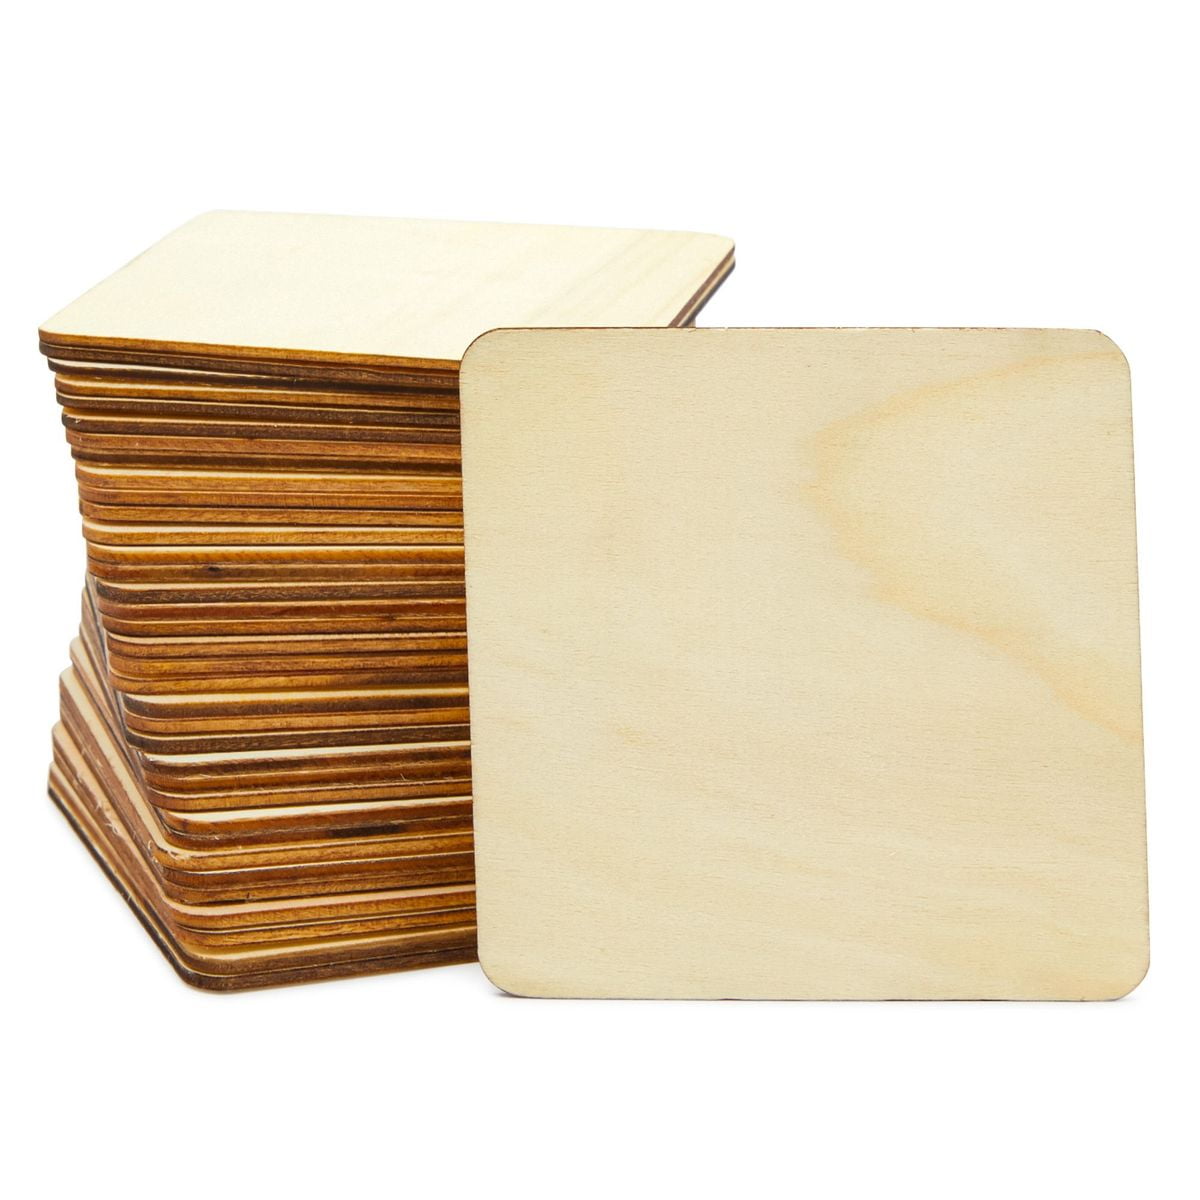 Unfinished Wood Board 55Pcs 4 x 4in Blank Natural Slices Wood Square for DIY Crafts Painting Decorations Pyrography Coasters Scrabble Tiles